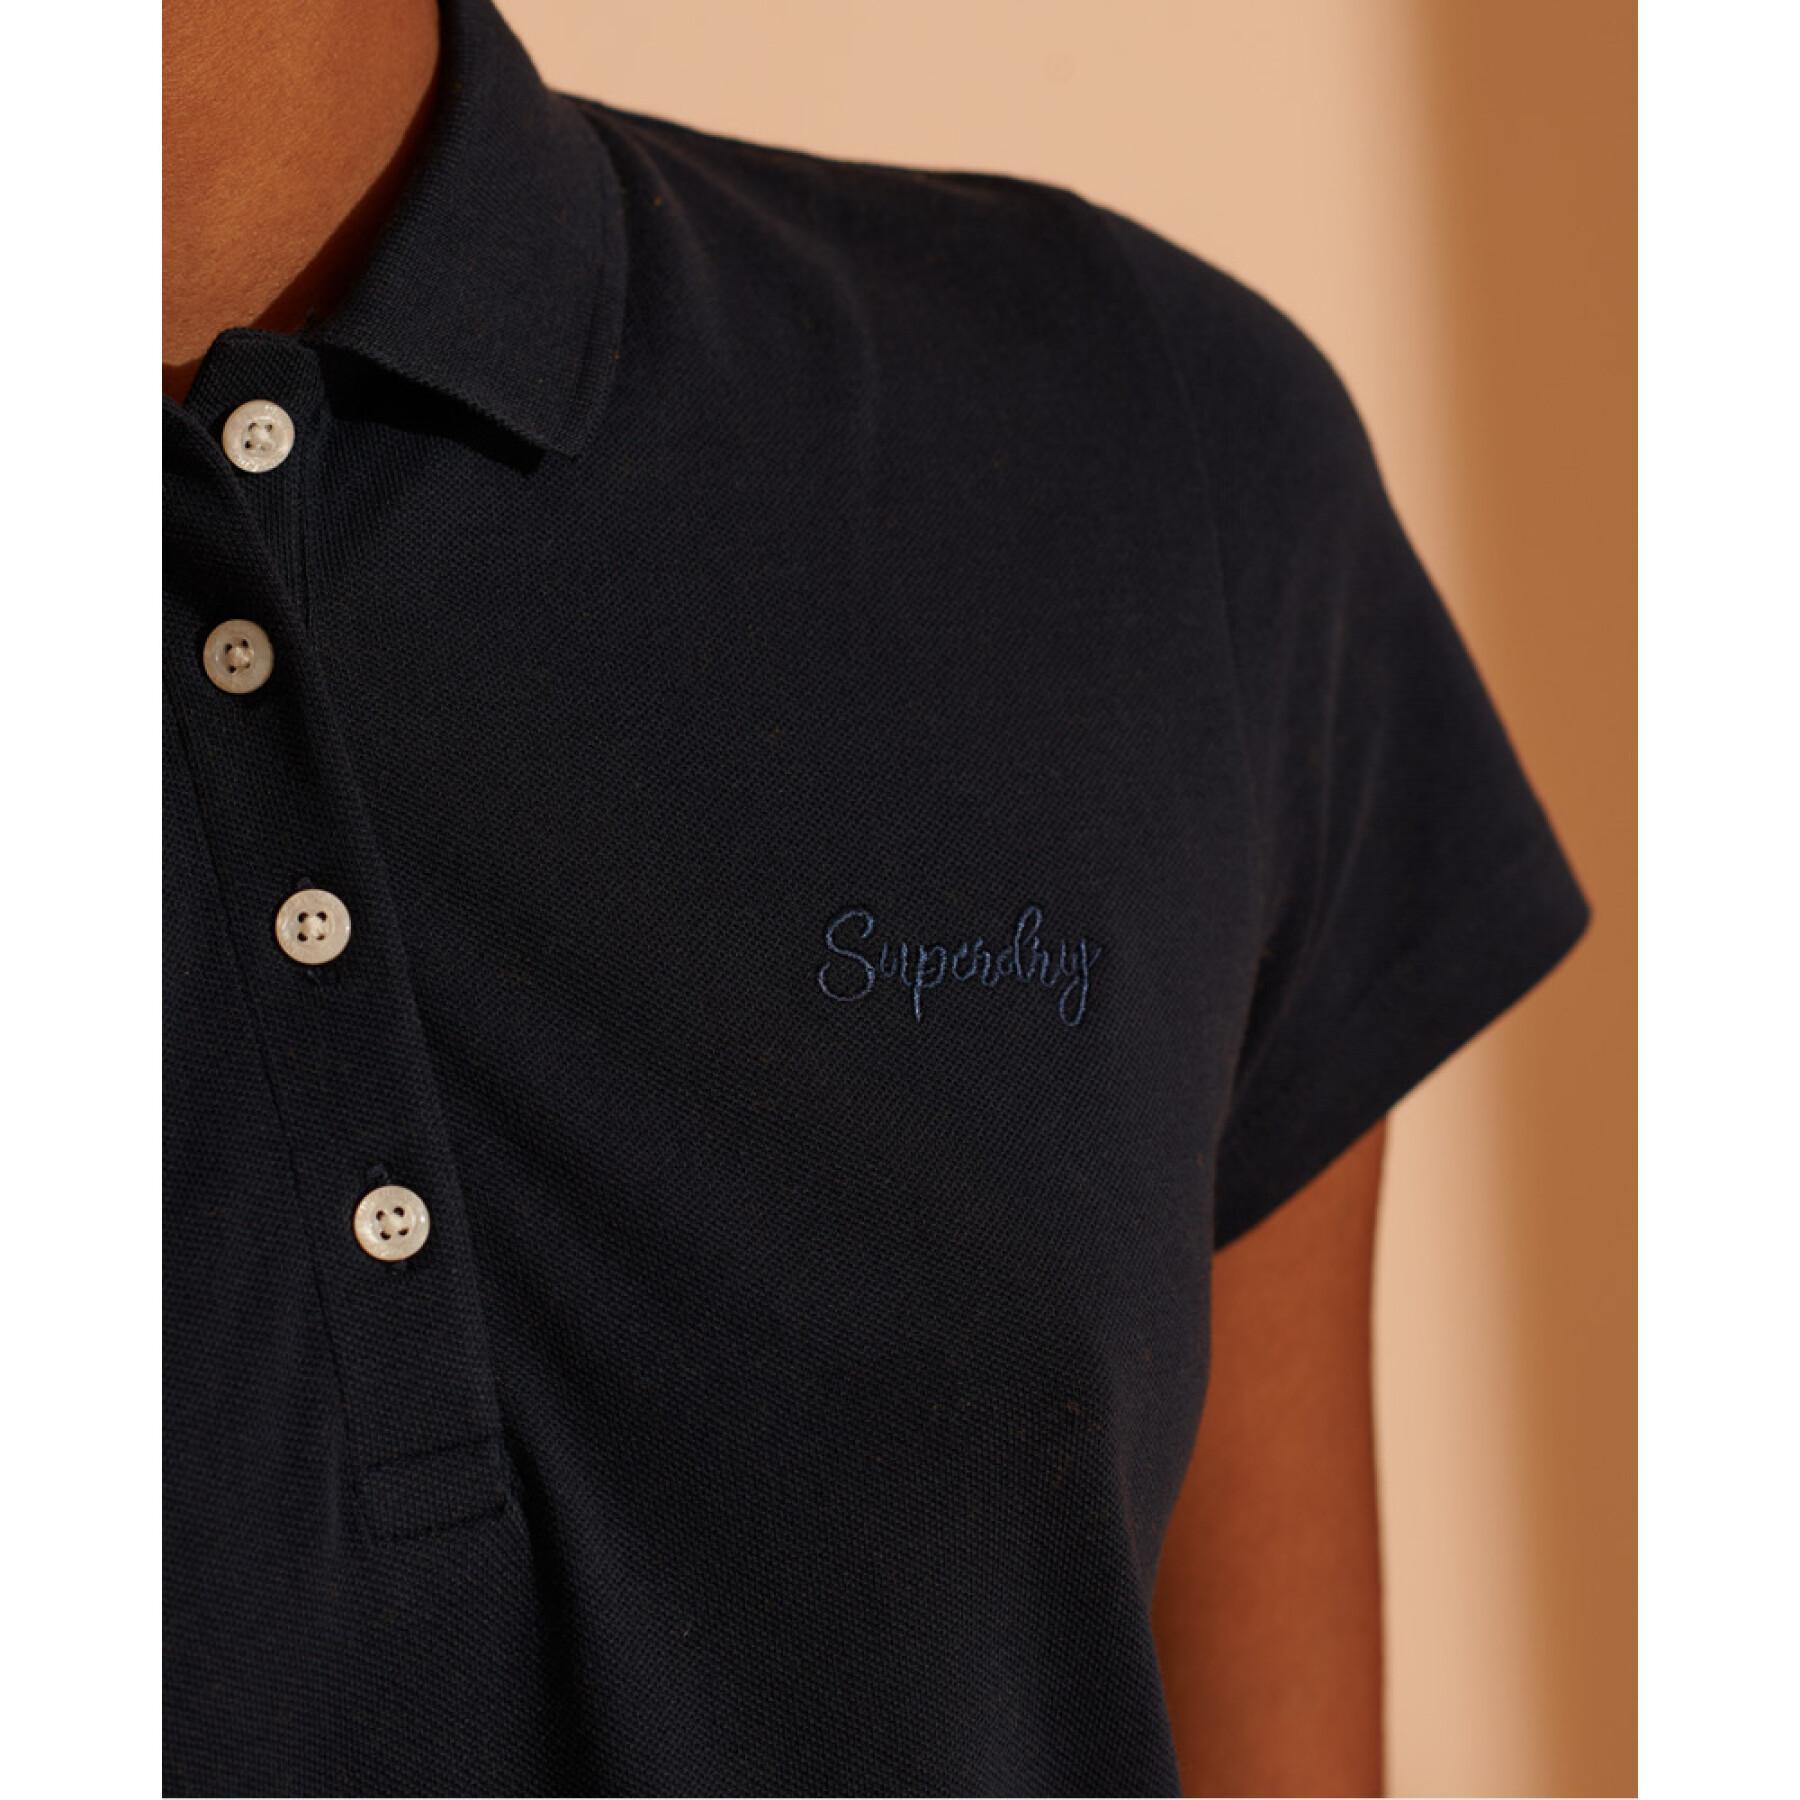 Damespolo Superdry Scripted